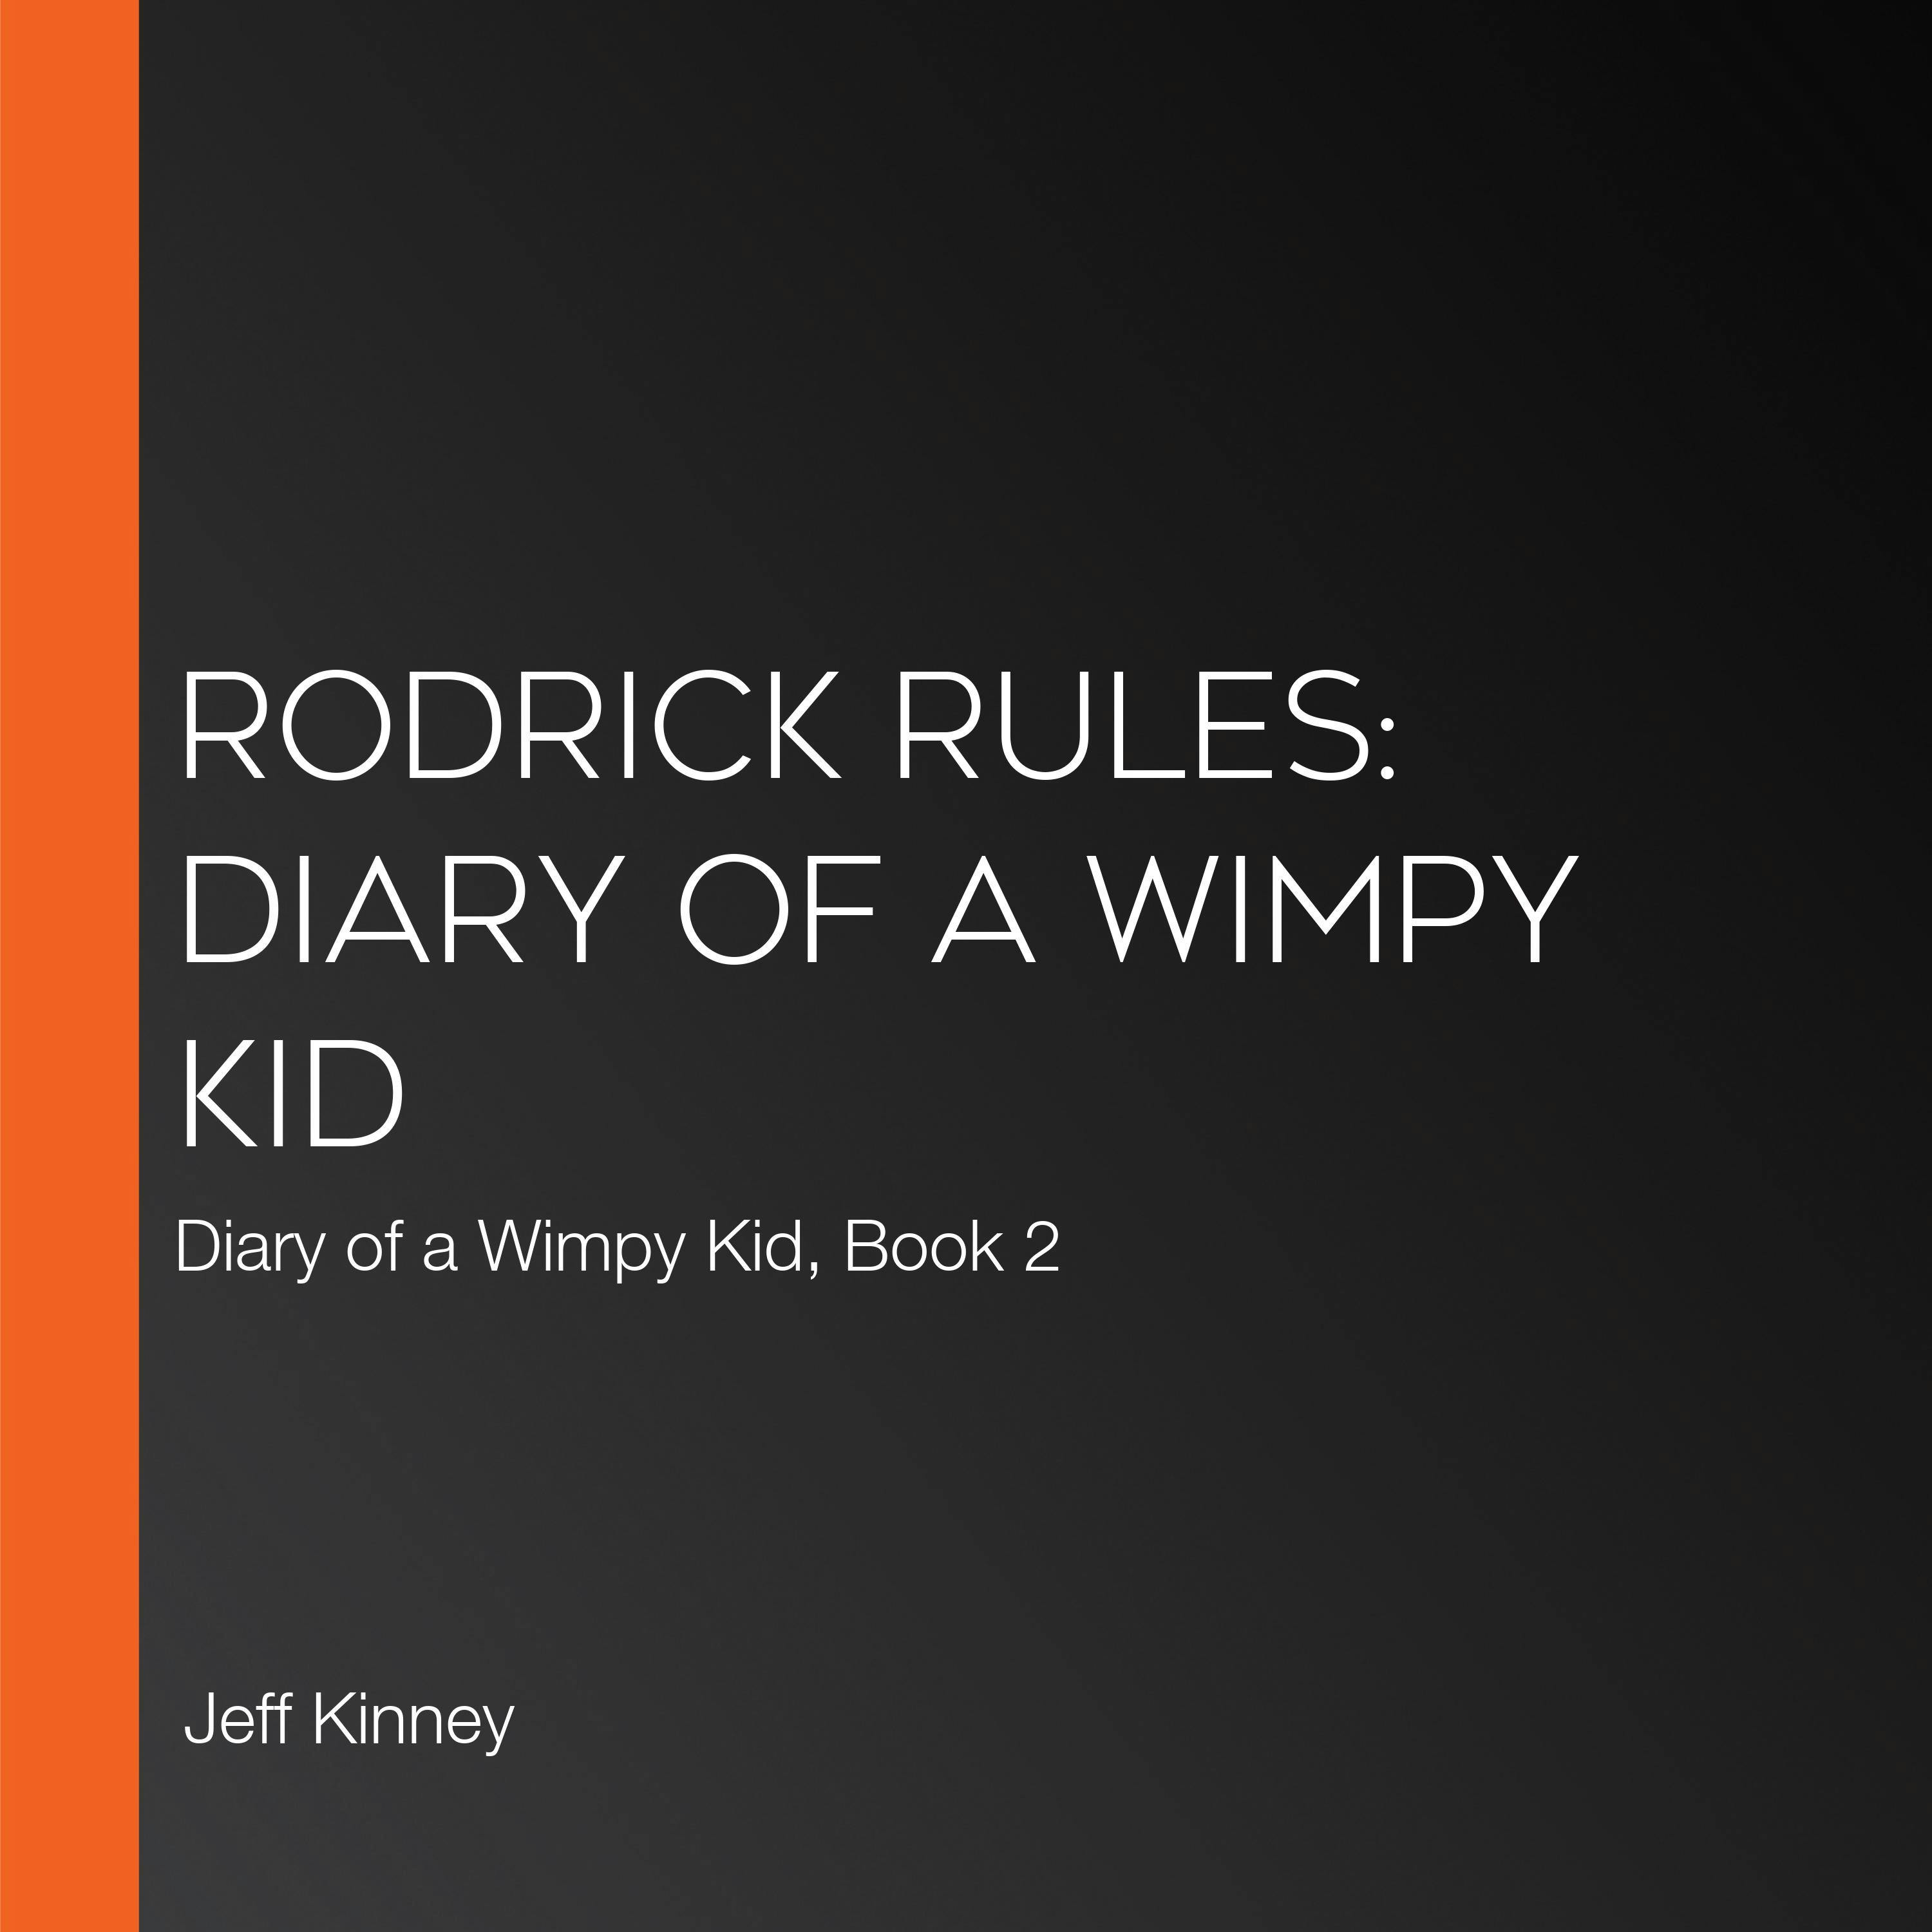 Rodrick Rules: Diary of a Wimpy Kid: Diary of a Wimpy Kid, Book 2 - undefined